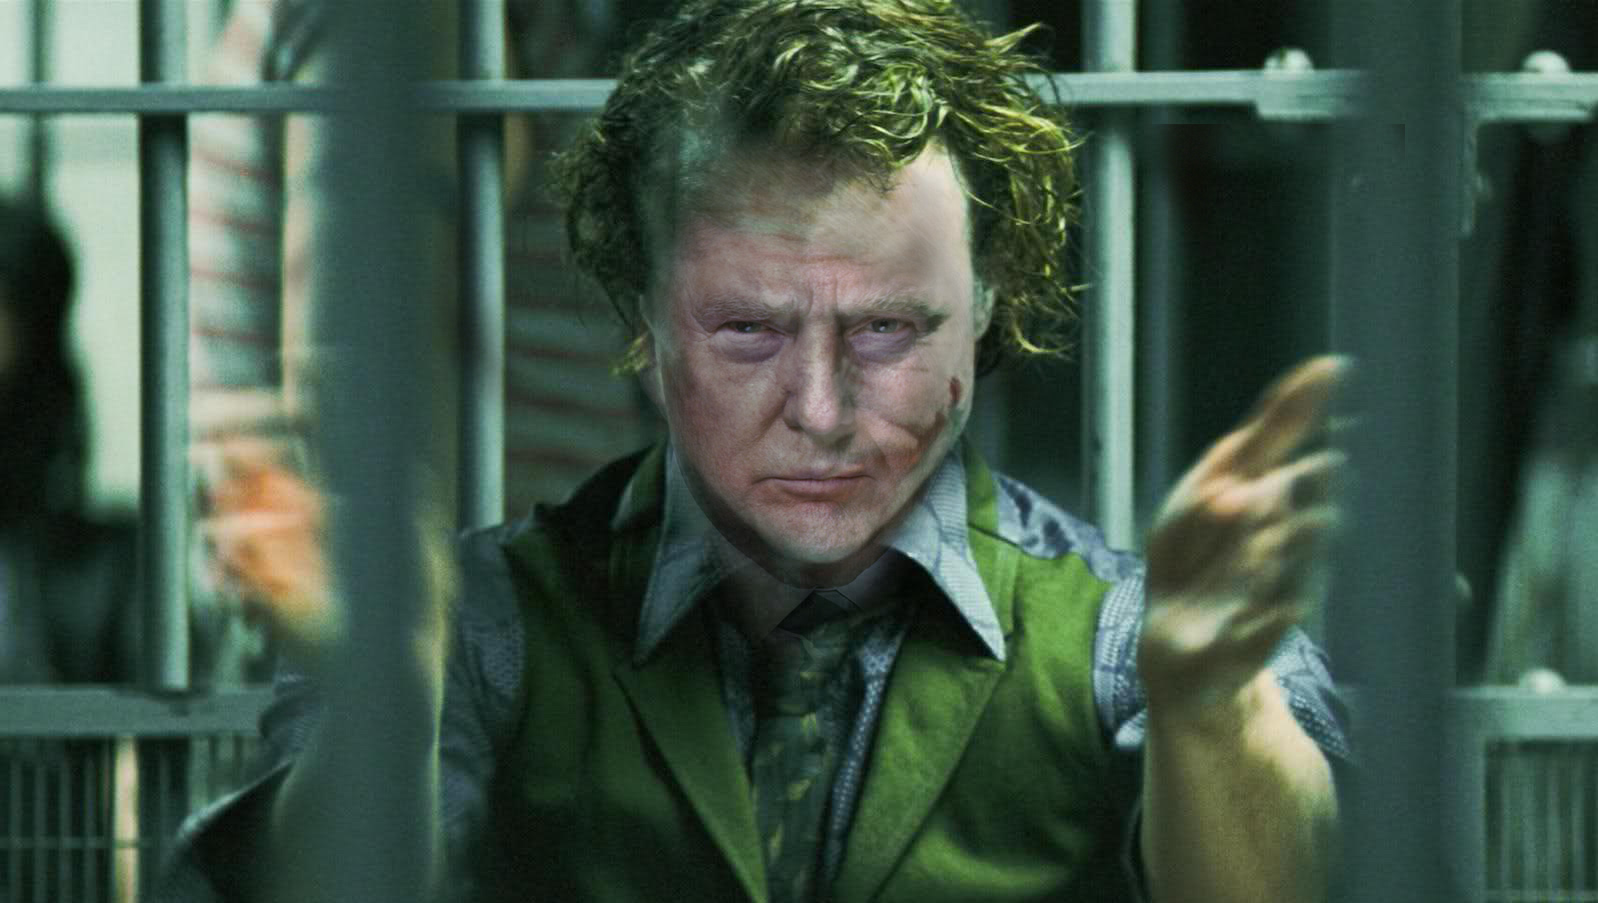 The Joker's from batman's head with Donald Trump's face photoshopped on.